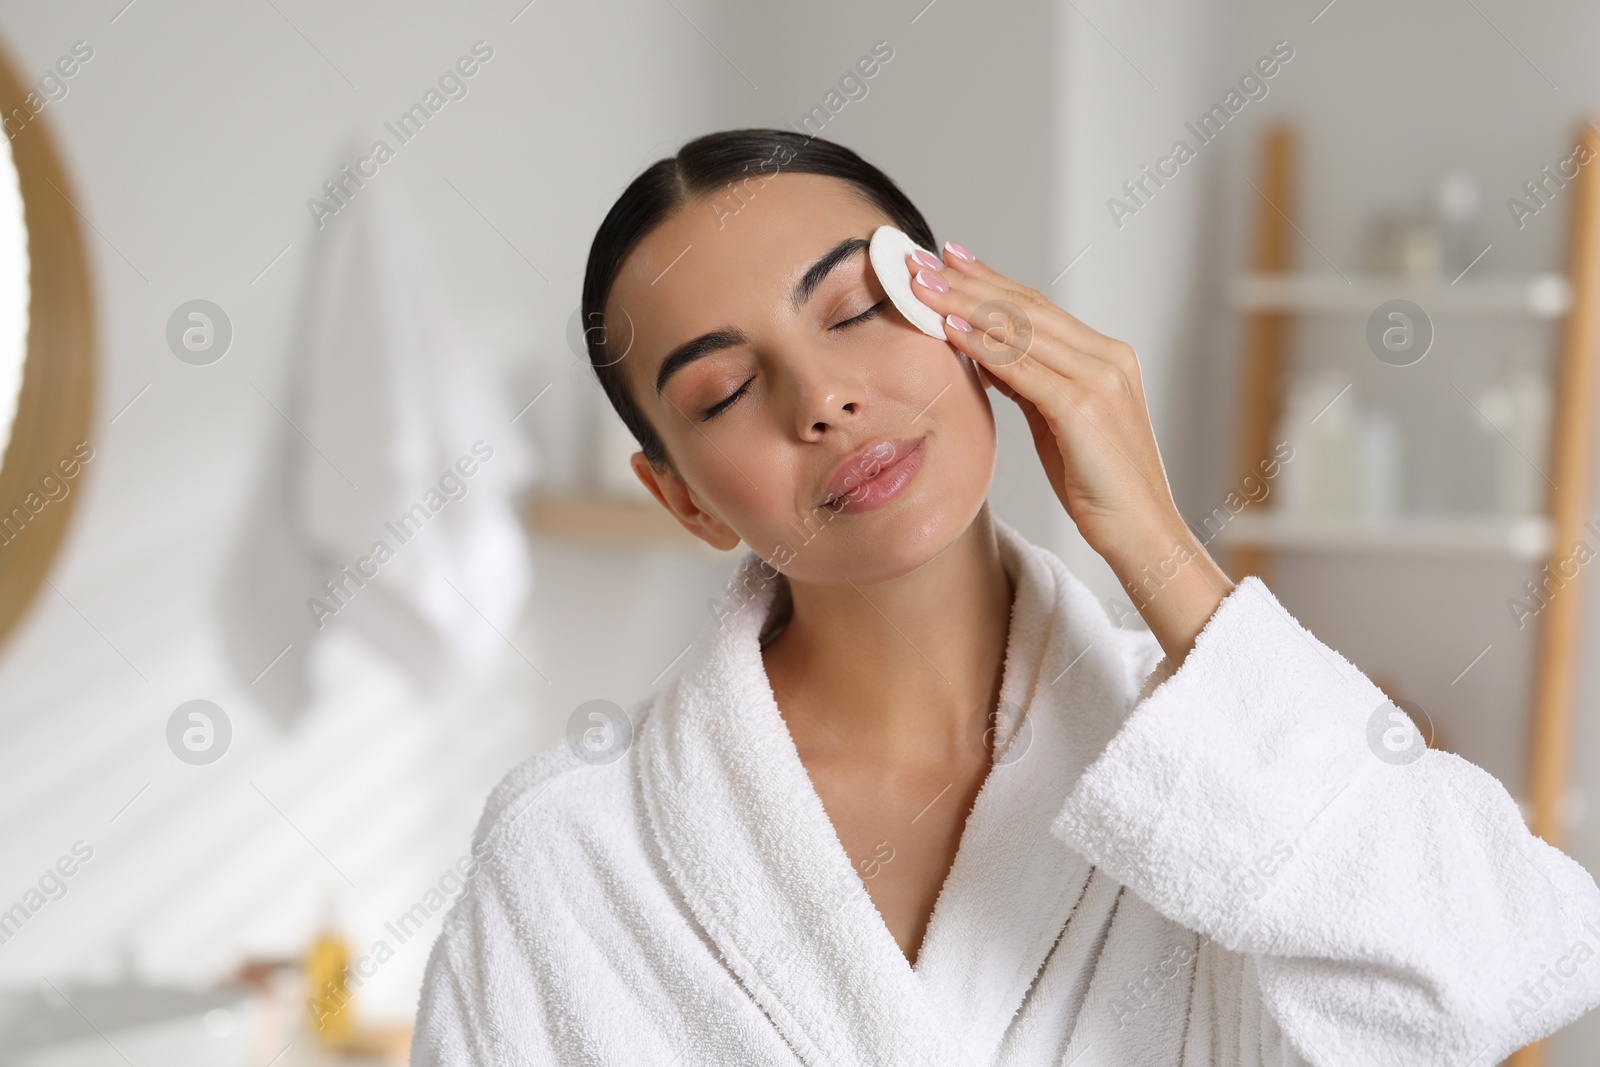 Photo of Beautiful woman removing makeup with cotton pad in bathroom, space for text